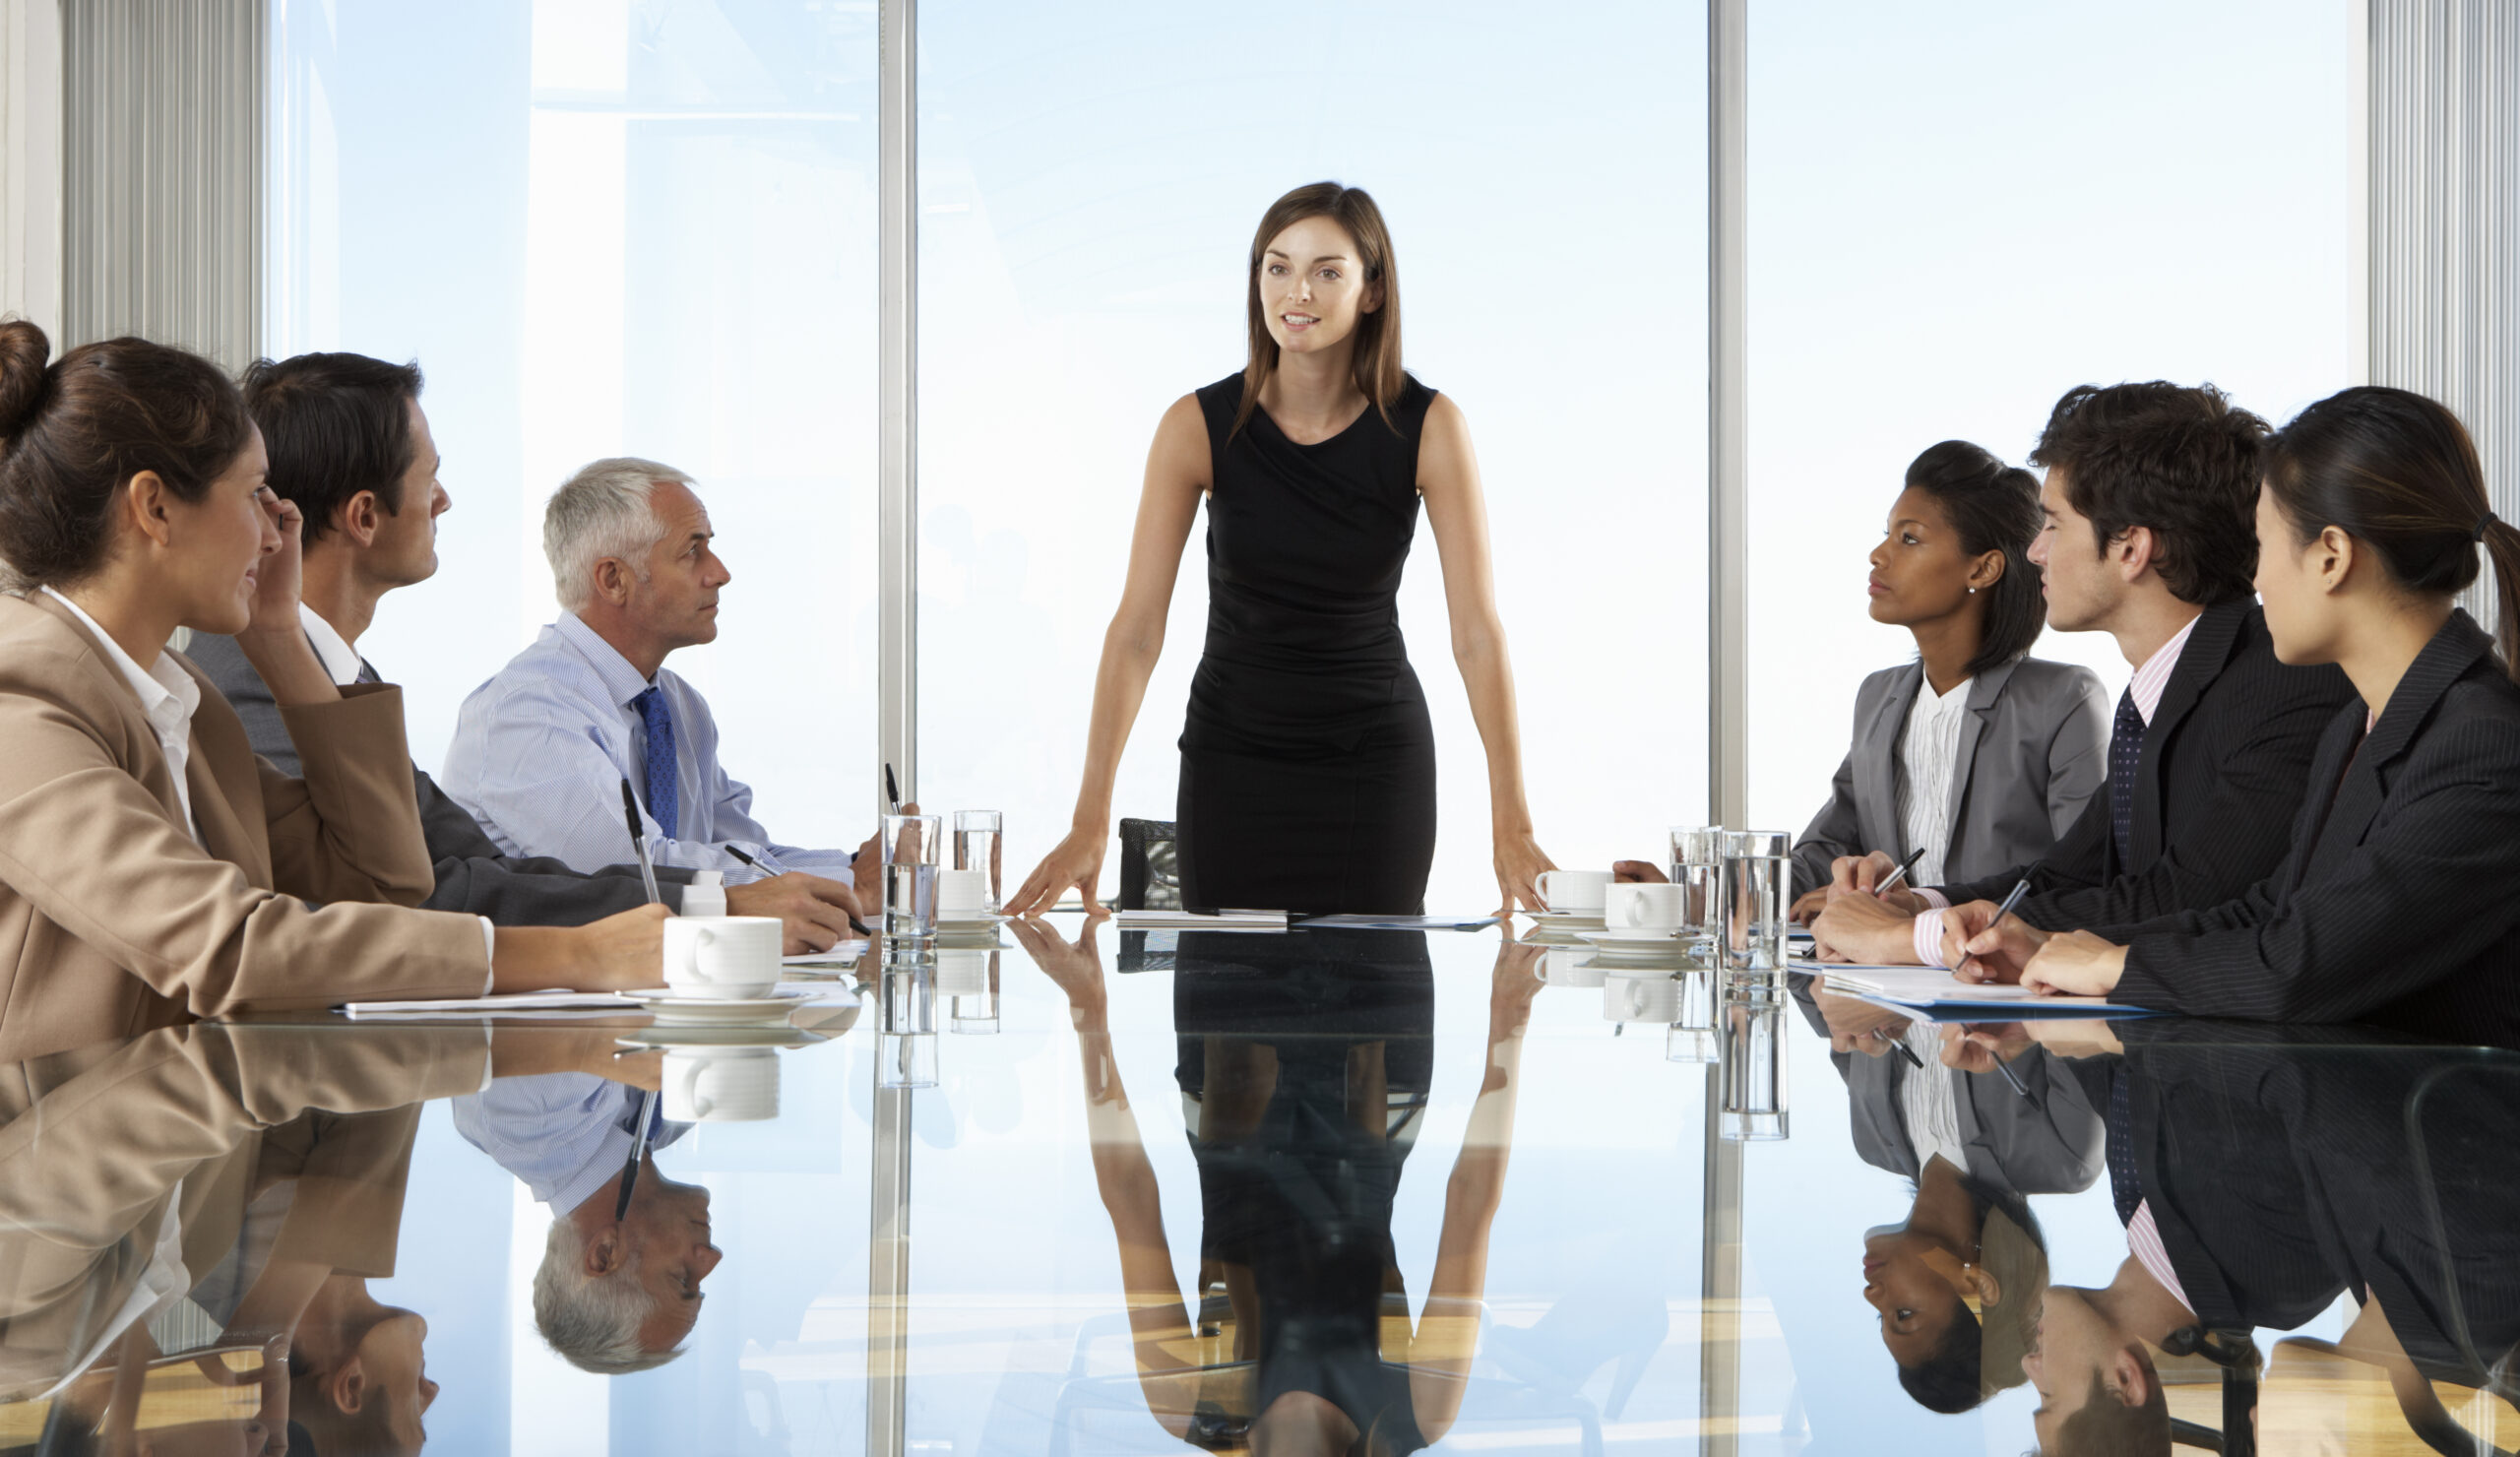 The photo shows a woman standing as a leader at a meeting with staff.